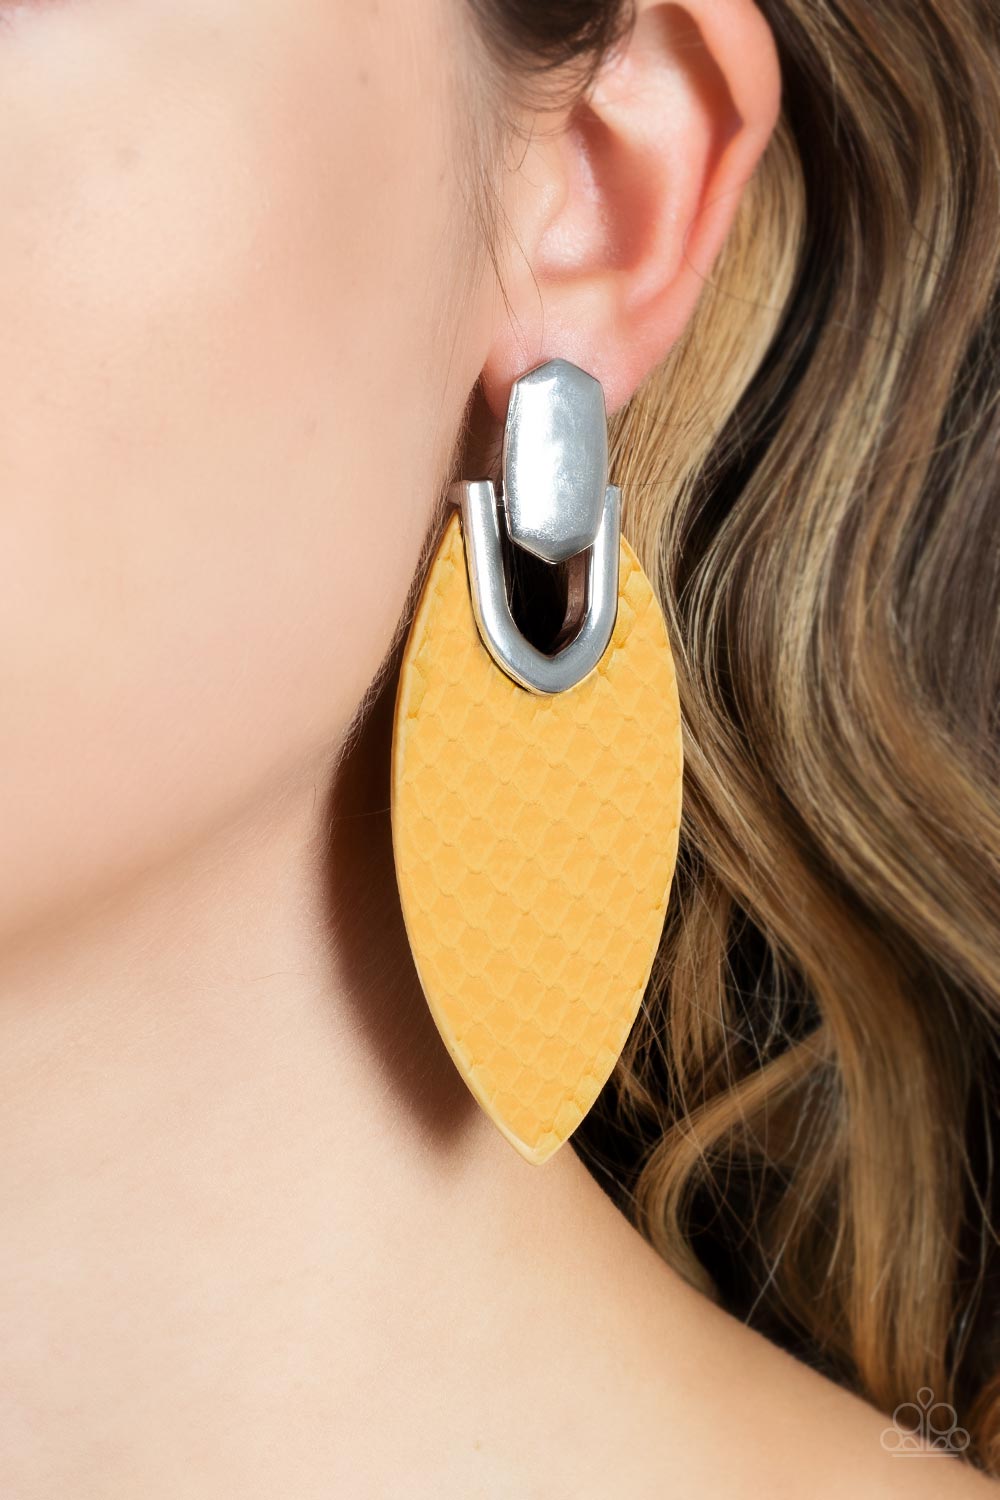 Wildly Workable Yellow Leather Earrings - Paparazzi Accessories-on model - CarasShop.com - $5 Jewelry by Cara Jewels